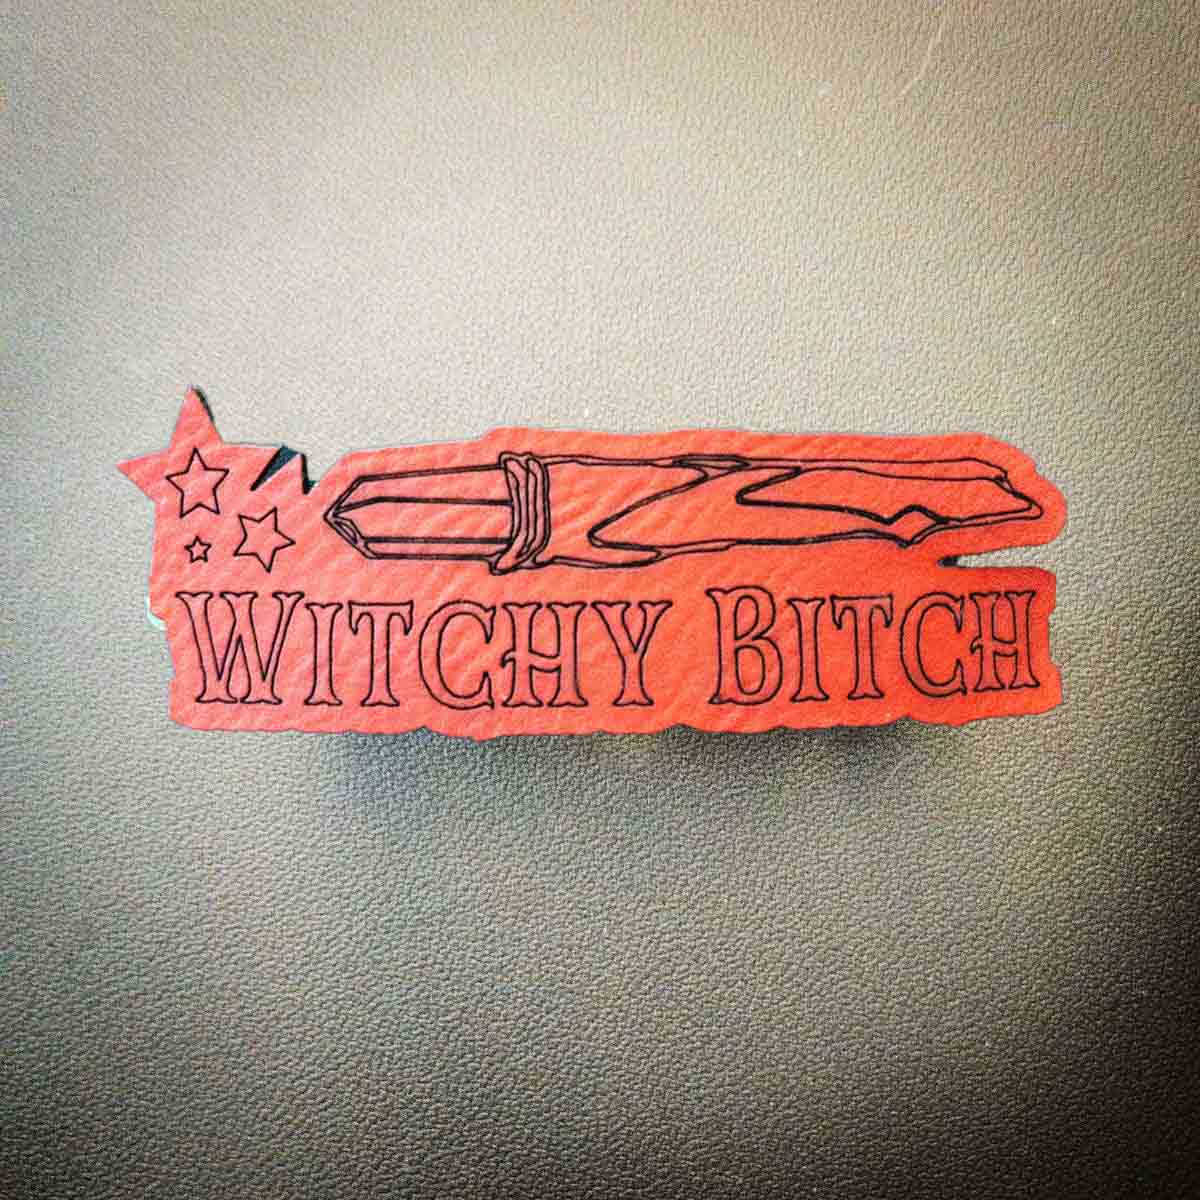 witchy bitch barrette; large; Melasdesign; red black; text; hair accessories; thick hair; goth; gothic; pagan